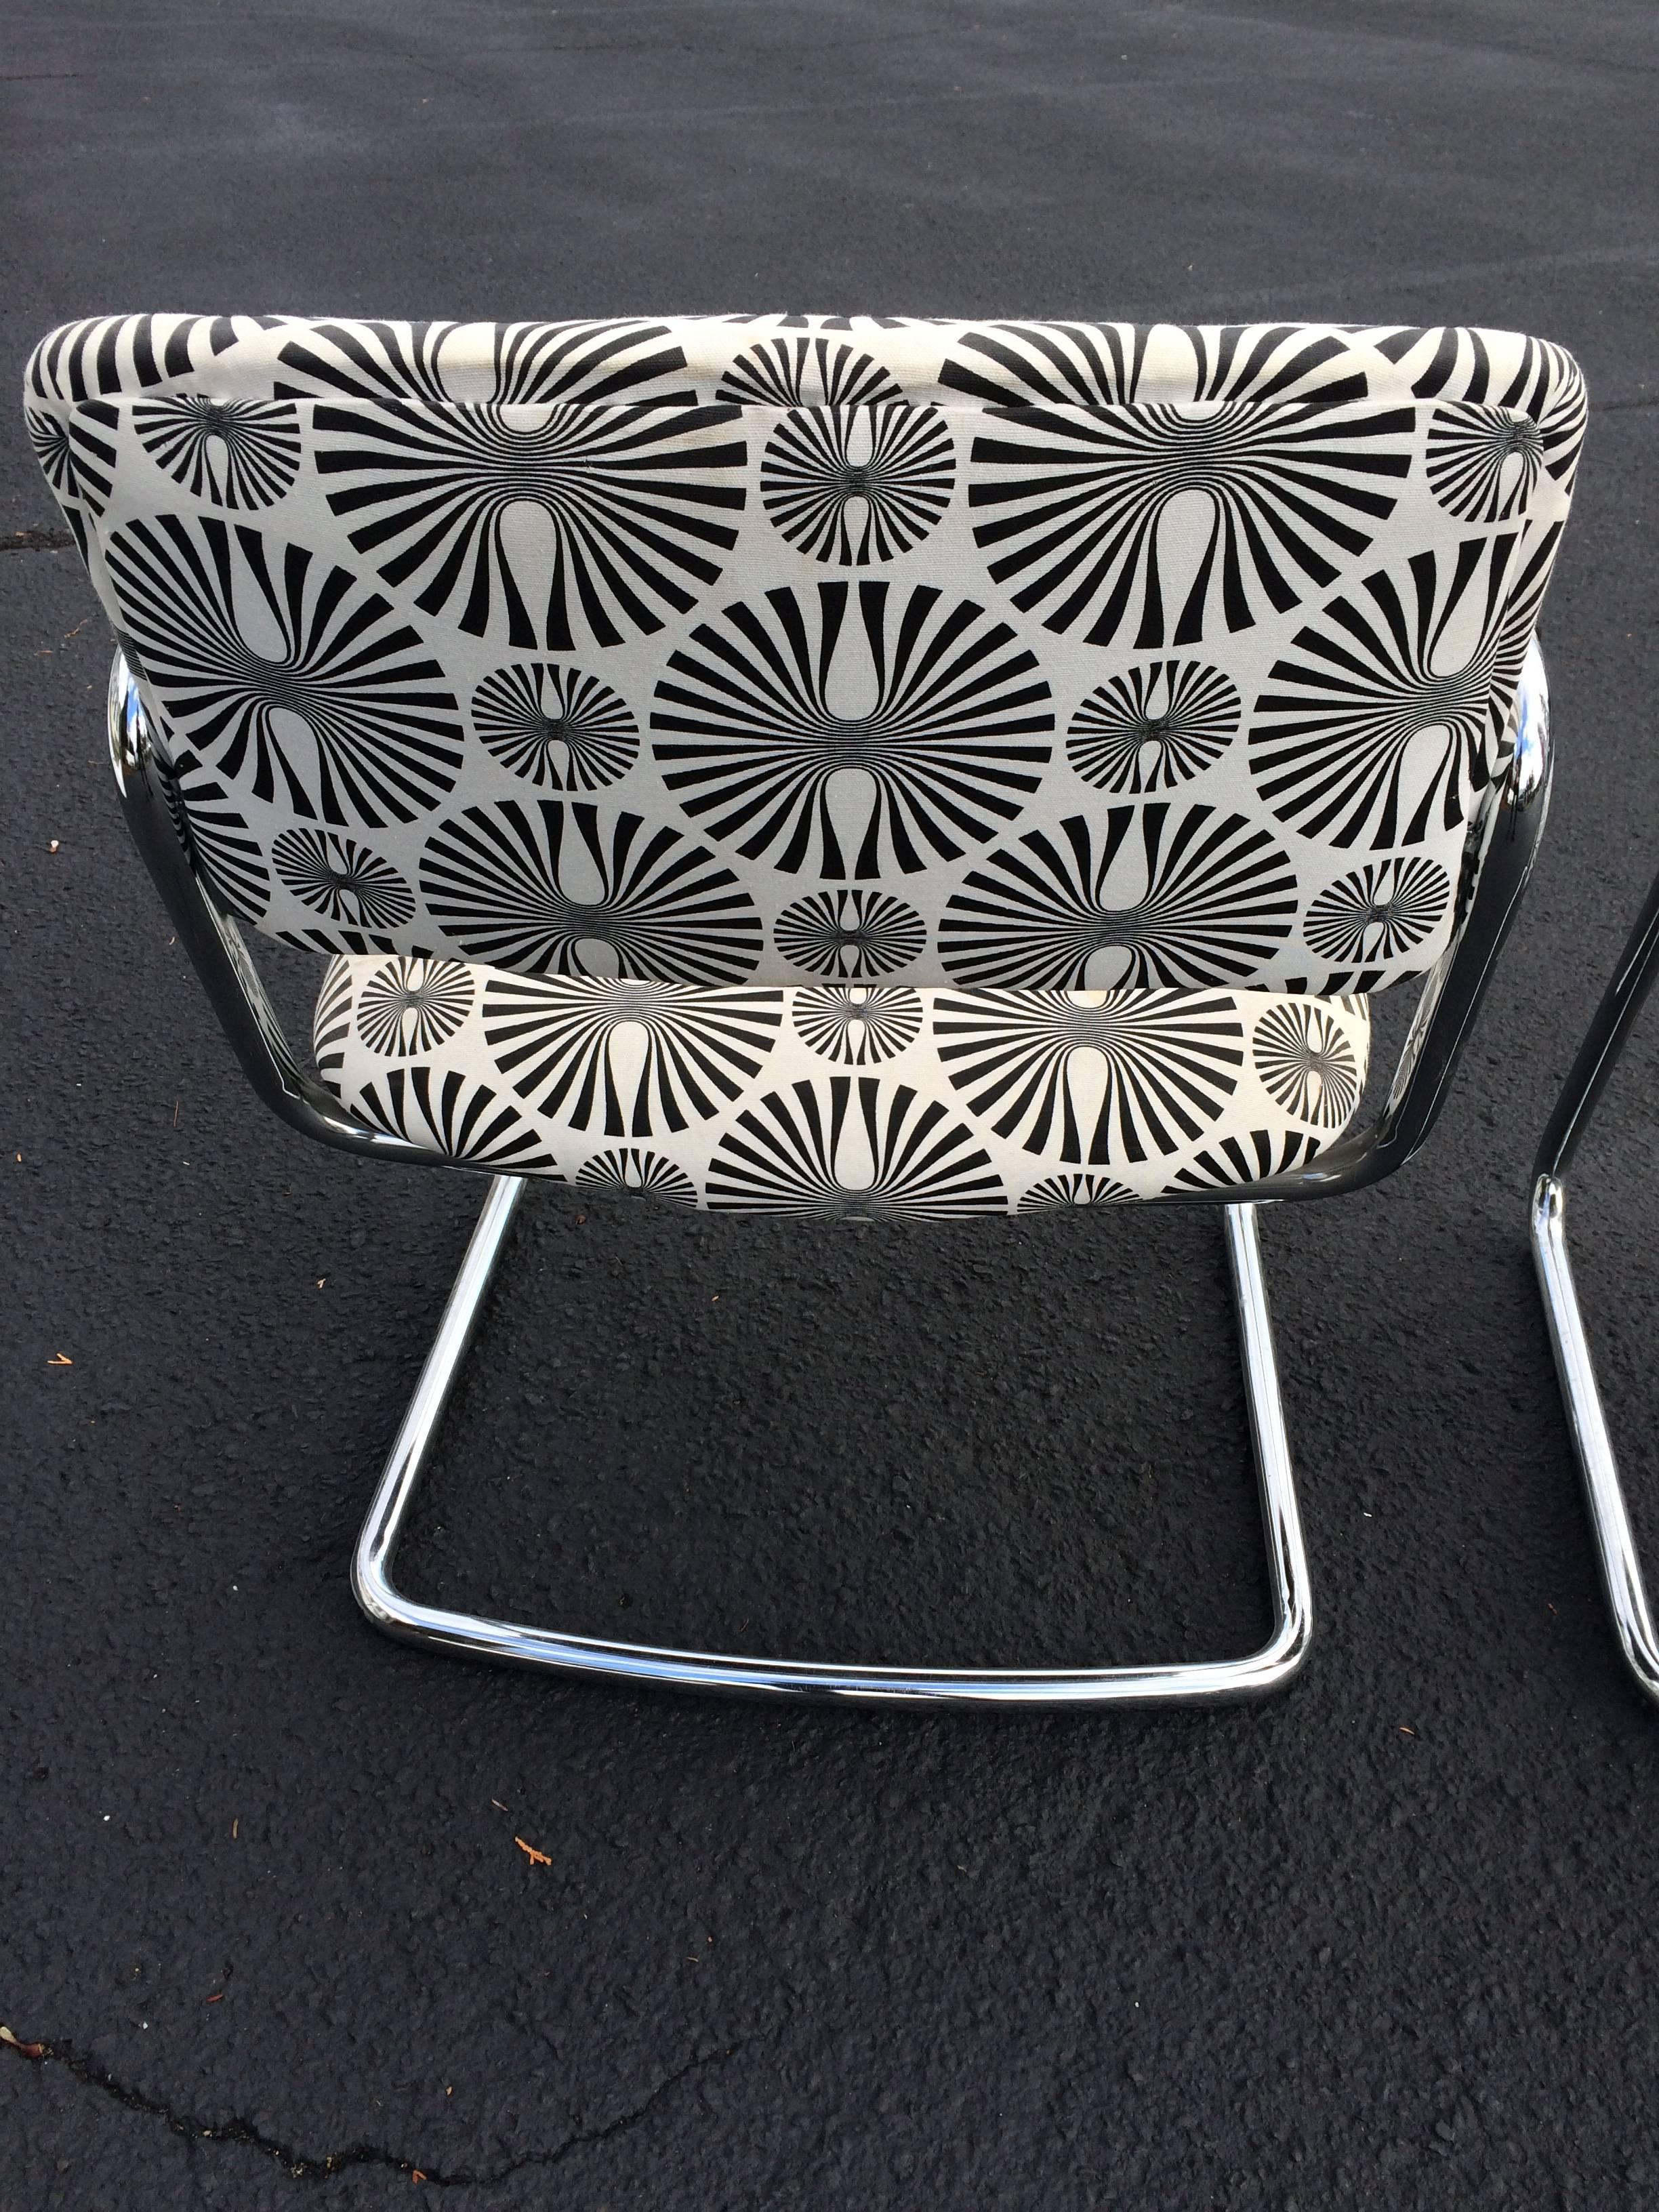 Pair of Mid-Century Optical Art Chairs in Black and White 3